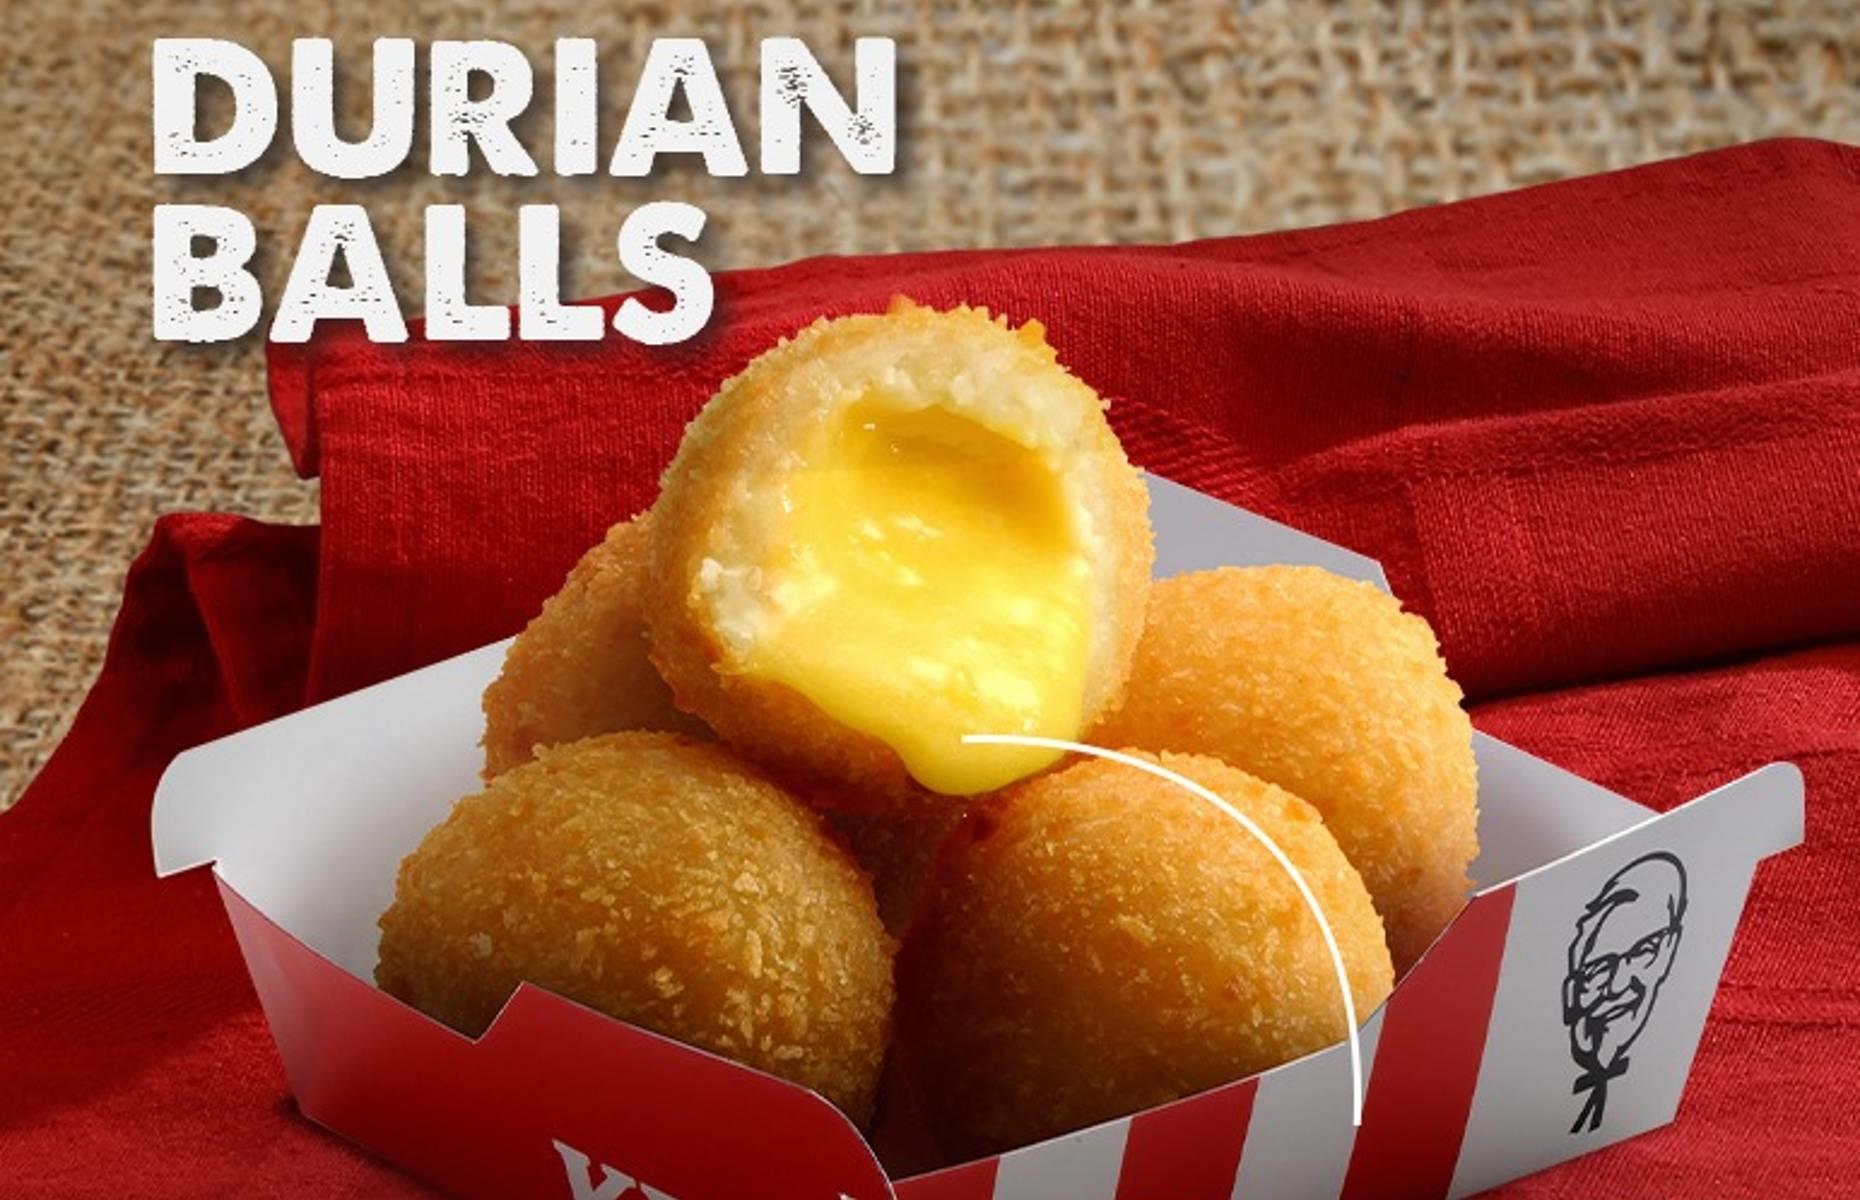 <p>Soft, creamy and delicious on the inside with a golden, crispy shell on the outside, Durian Balls were introduced at KFC in Malaysia for a limited time in 2020 and 2021. The fruity dessert is made with D24 durian, a popular variation of the spiky-skinned, notoriously funky-smelling tropical fruit. Lovers of the food no doubt found it delicious.</p>